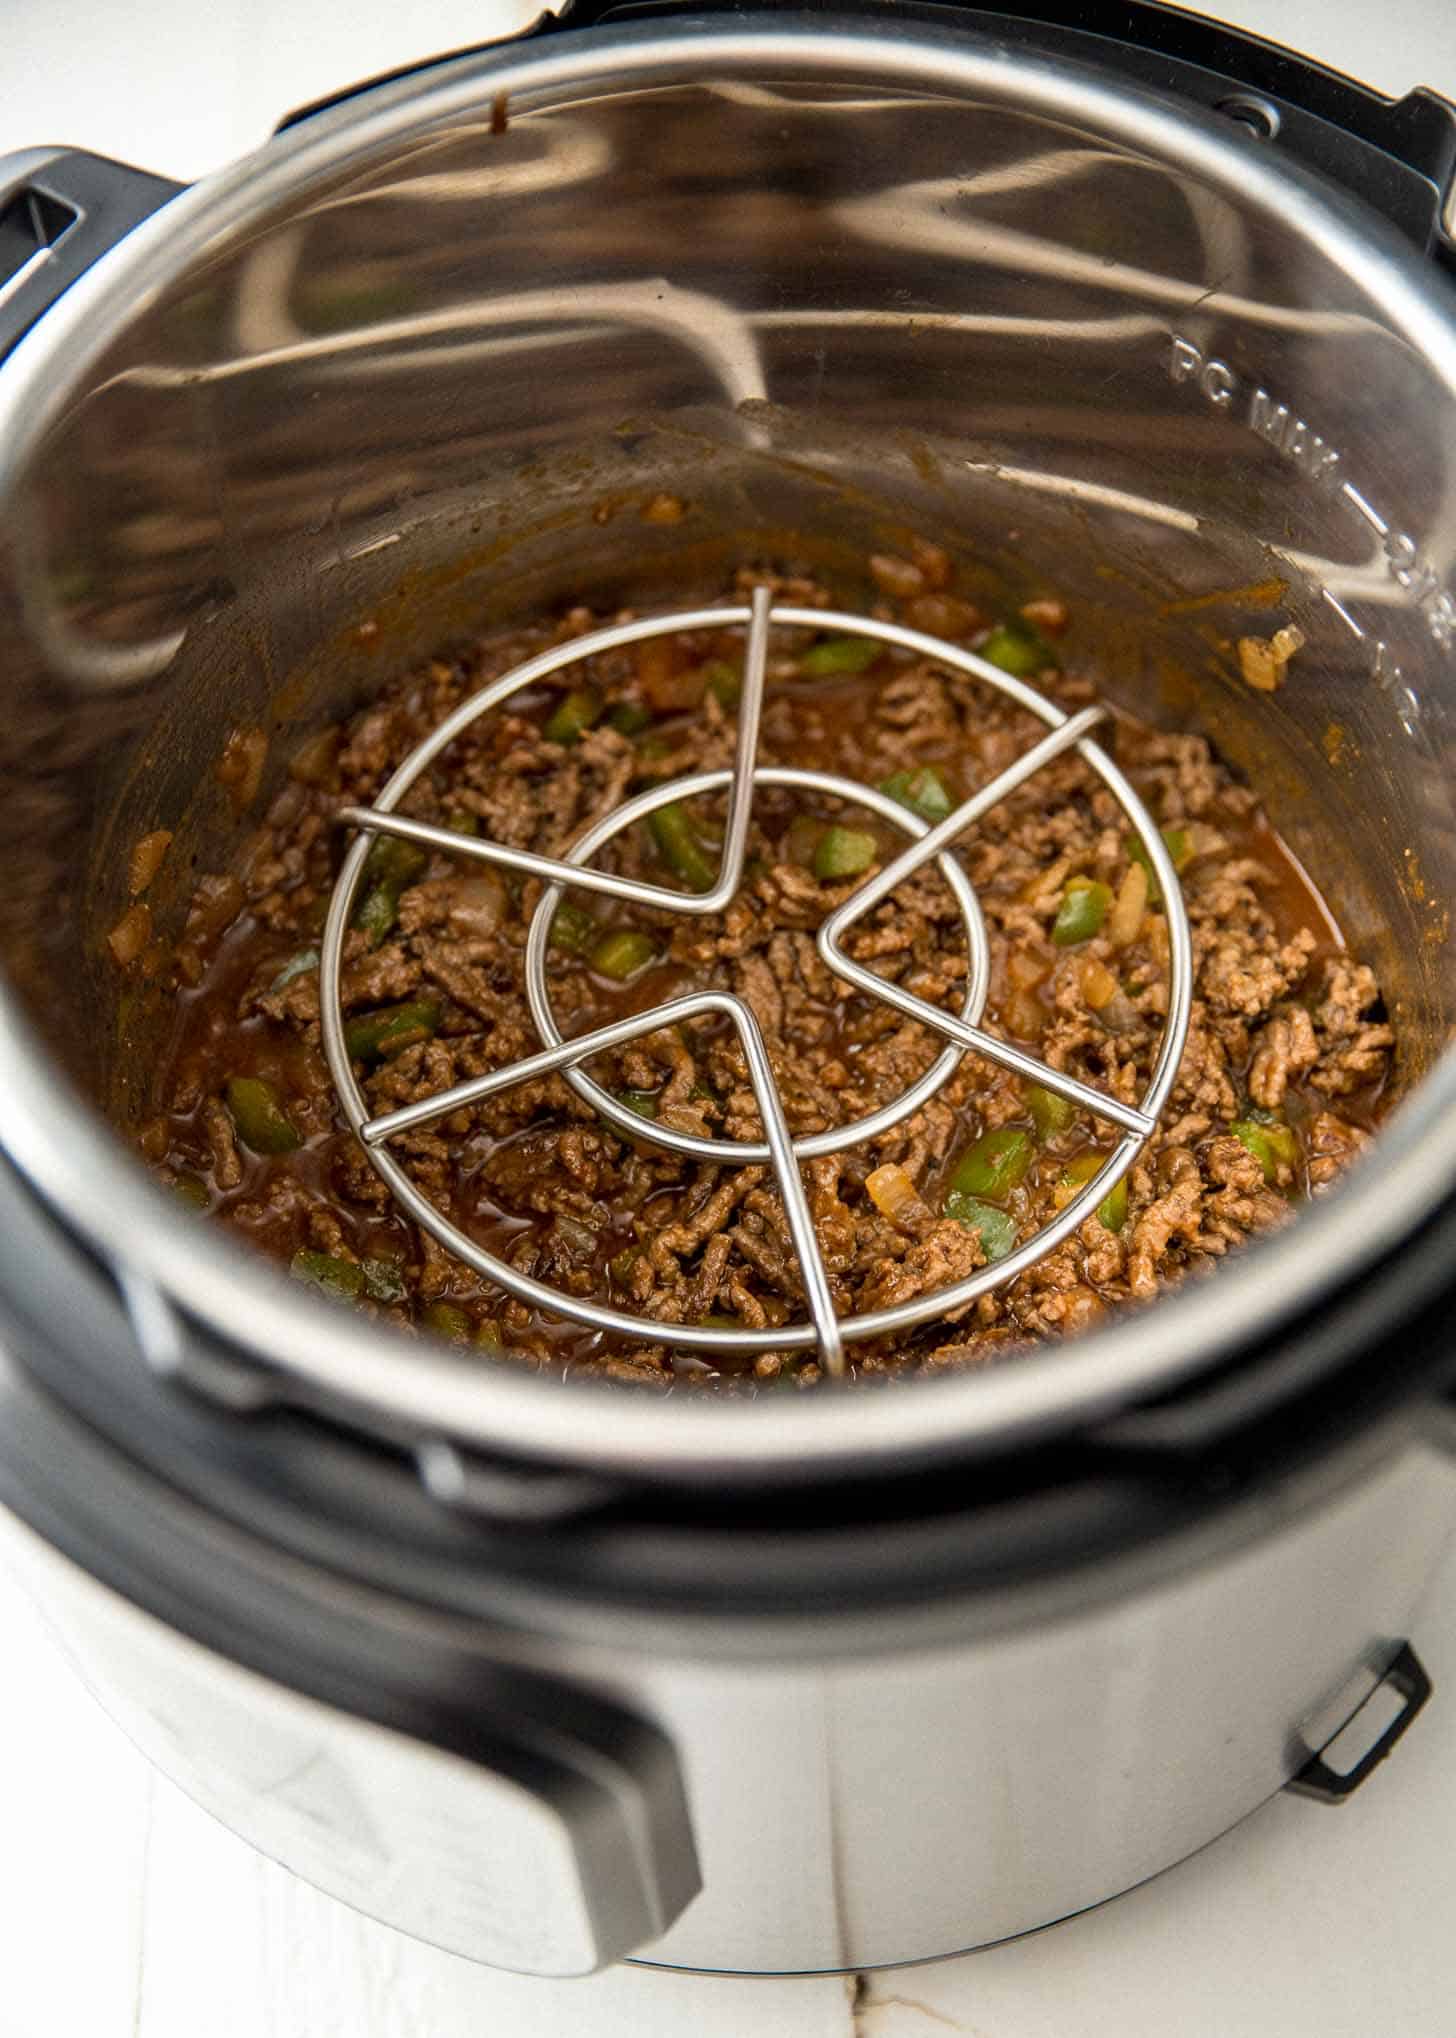 How to Use Pot-in-Pot Method with the Instant Pot